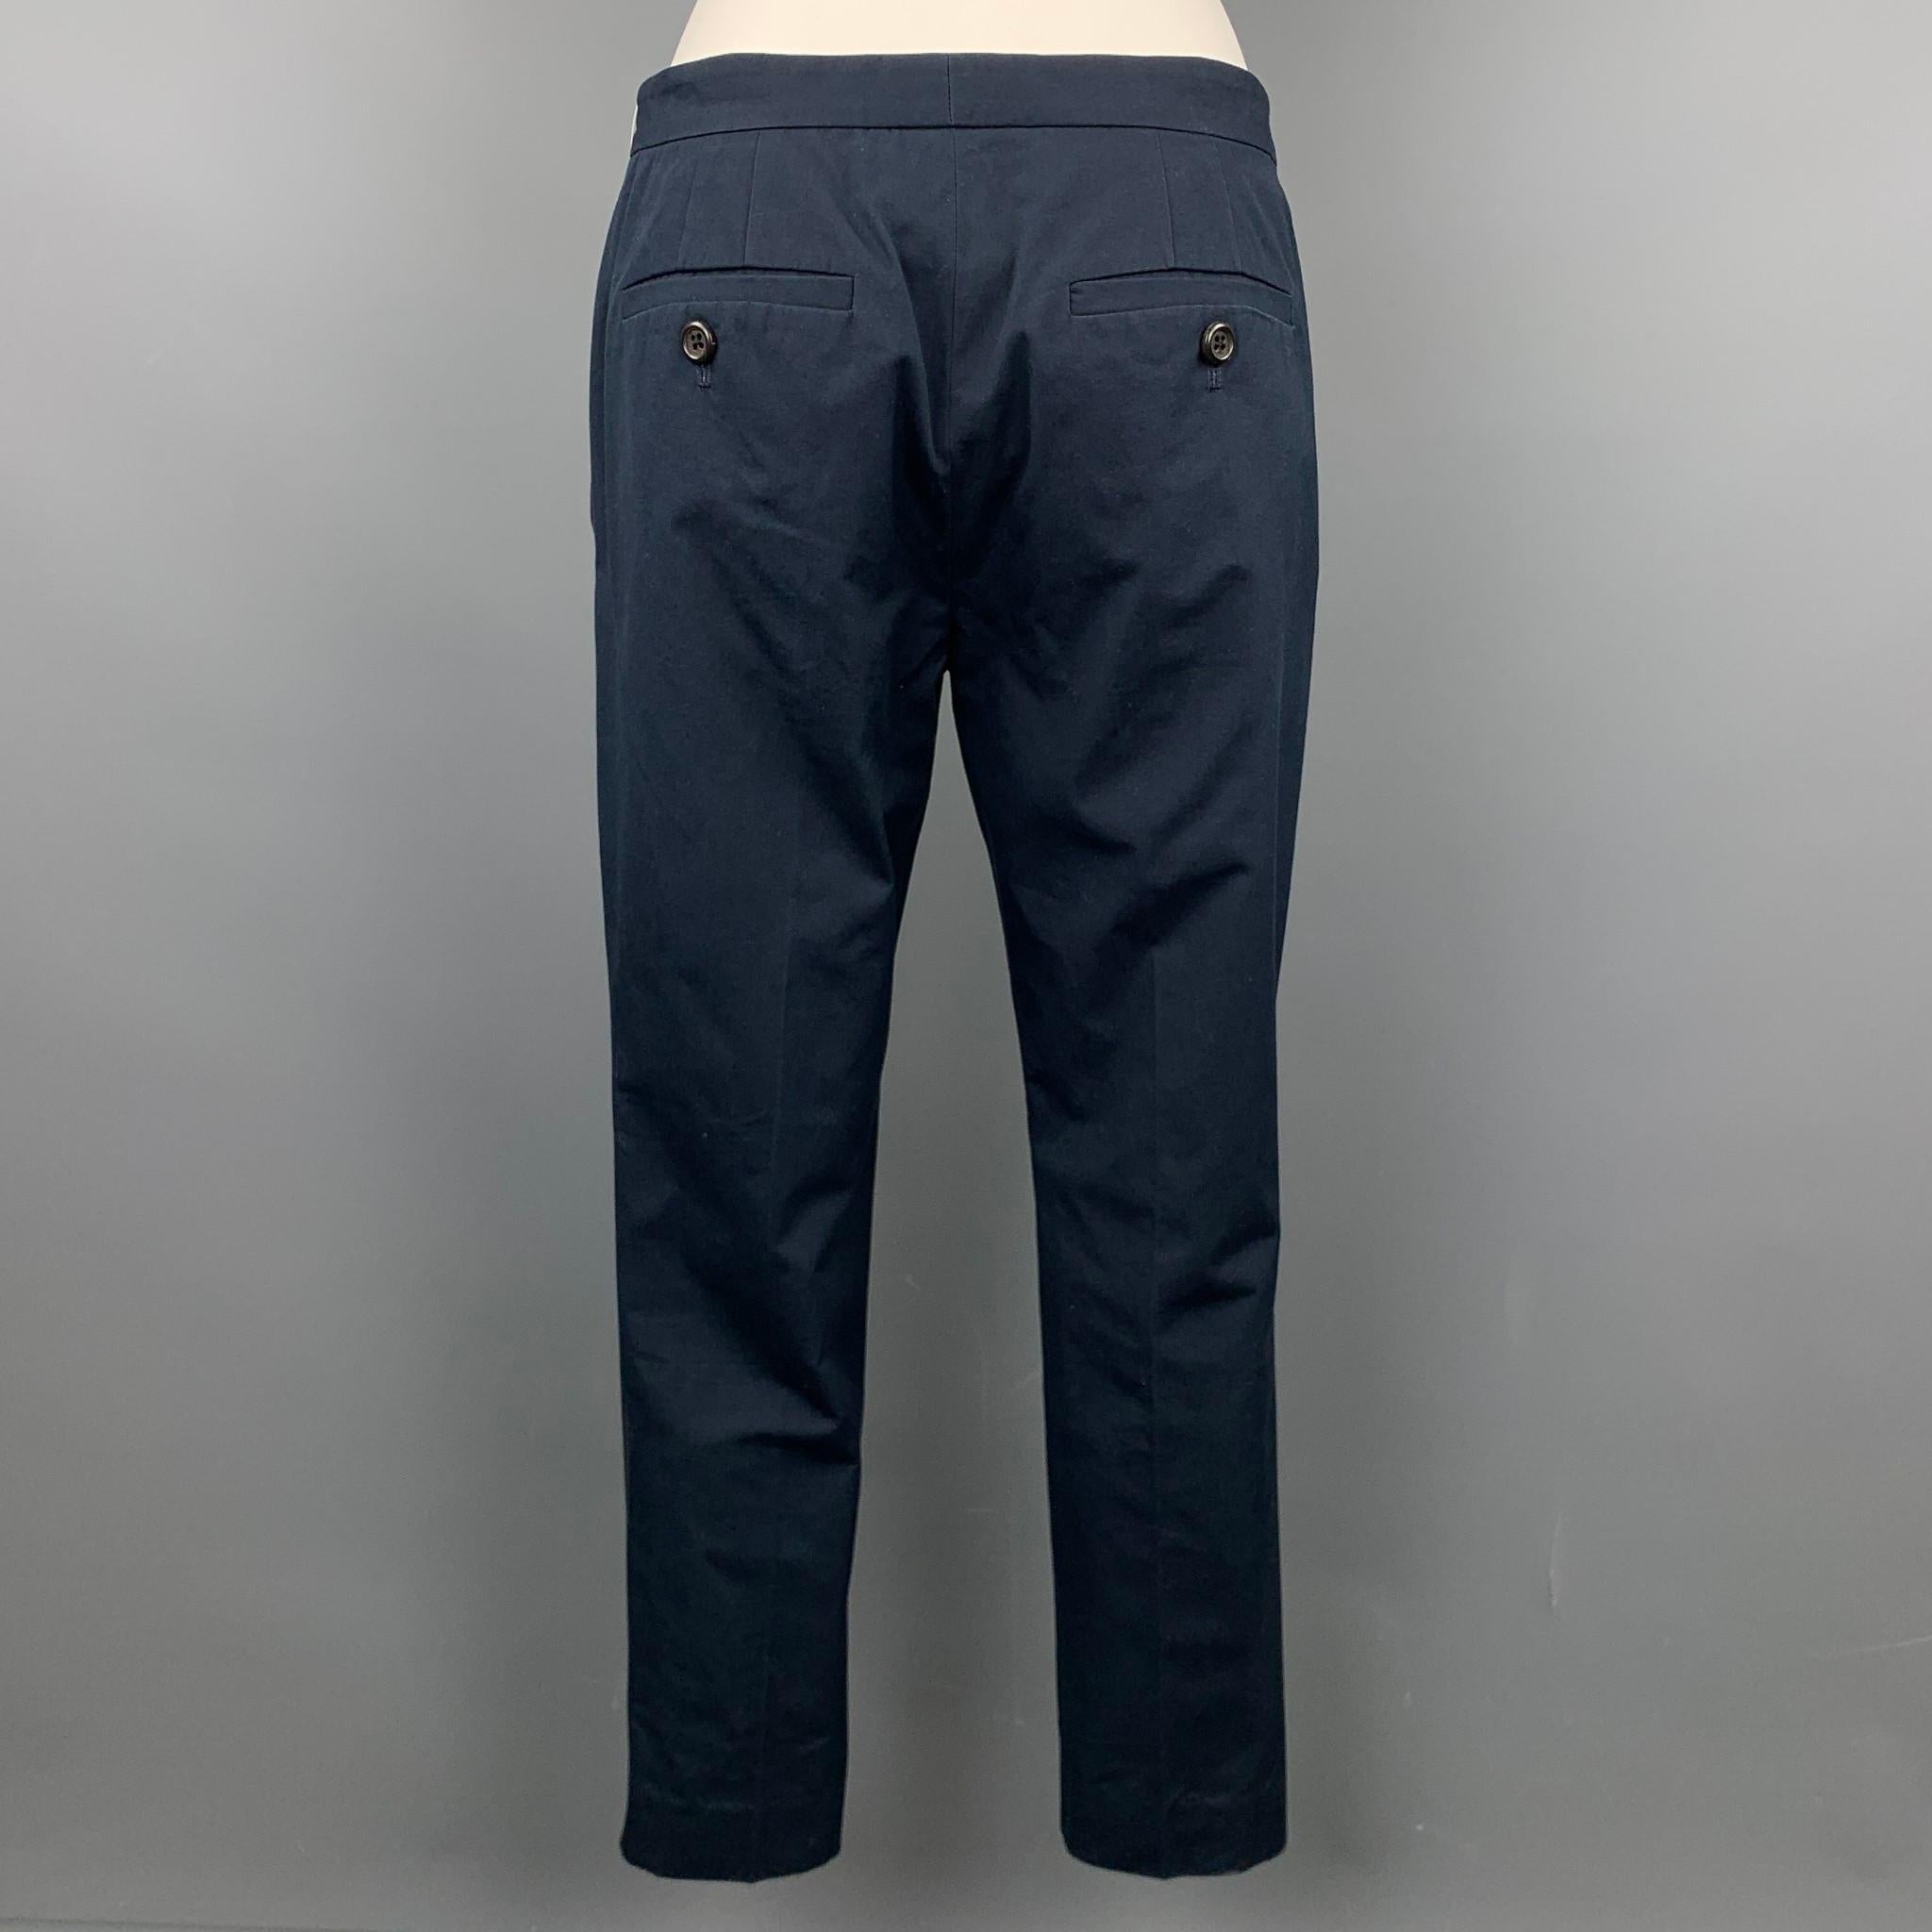 MARC JACOBS casual pants comes in a navy cotton featuring a chino style, narrow leg, and a zip fly closure.

Very Good Pre-Owned Condition.
Marked: 0

Measurements:

Waist: 30 in.
Rise: 8.5 in.
Inseam: 26 in.